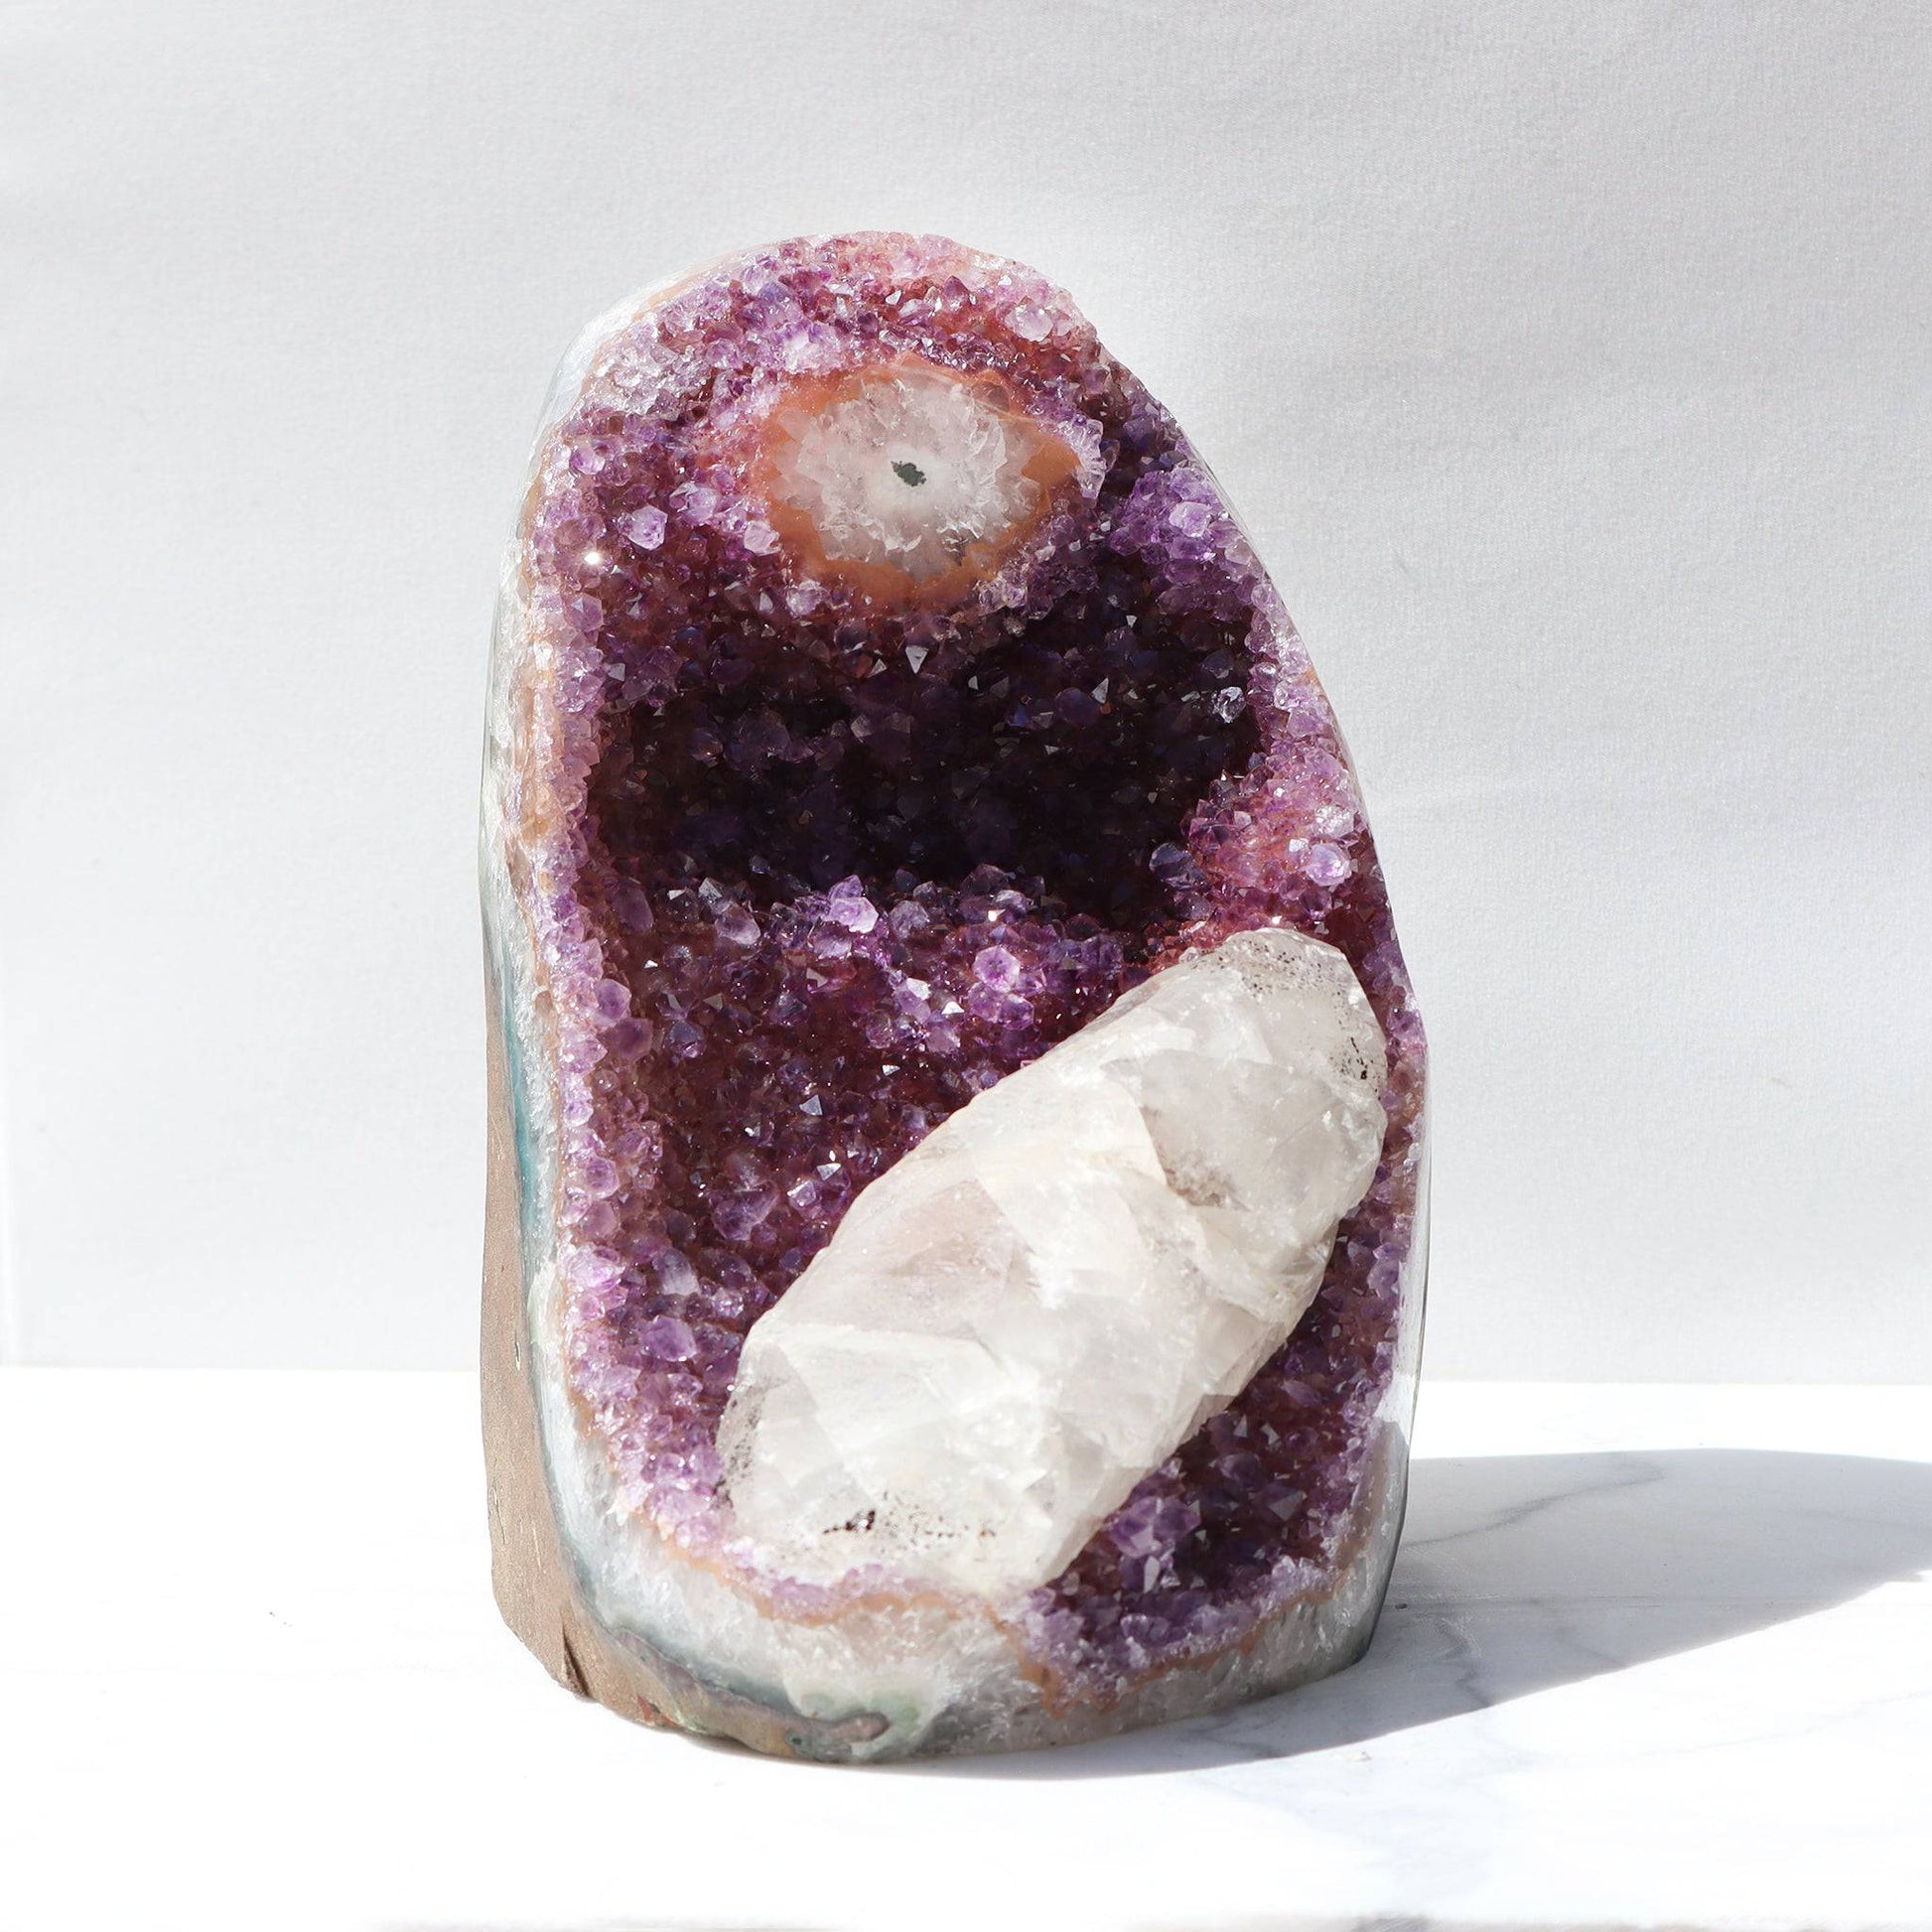 Distinctive tones of purple, pink, orange, and red on this rare amethyst piece. This mineral masterpiece was naturally formed with a huge calcite formation. Stunning large cut-stalactite